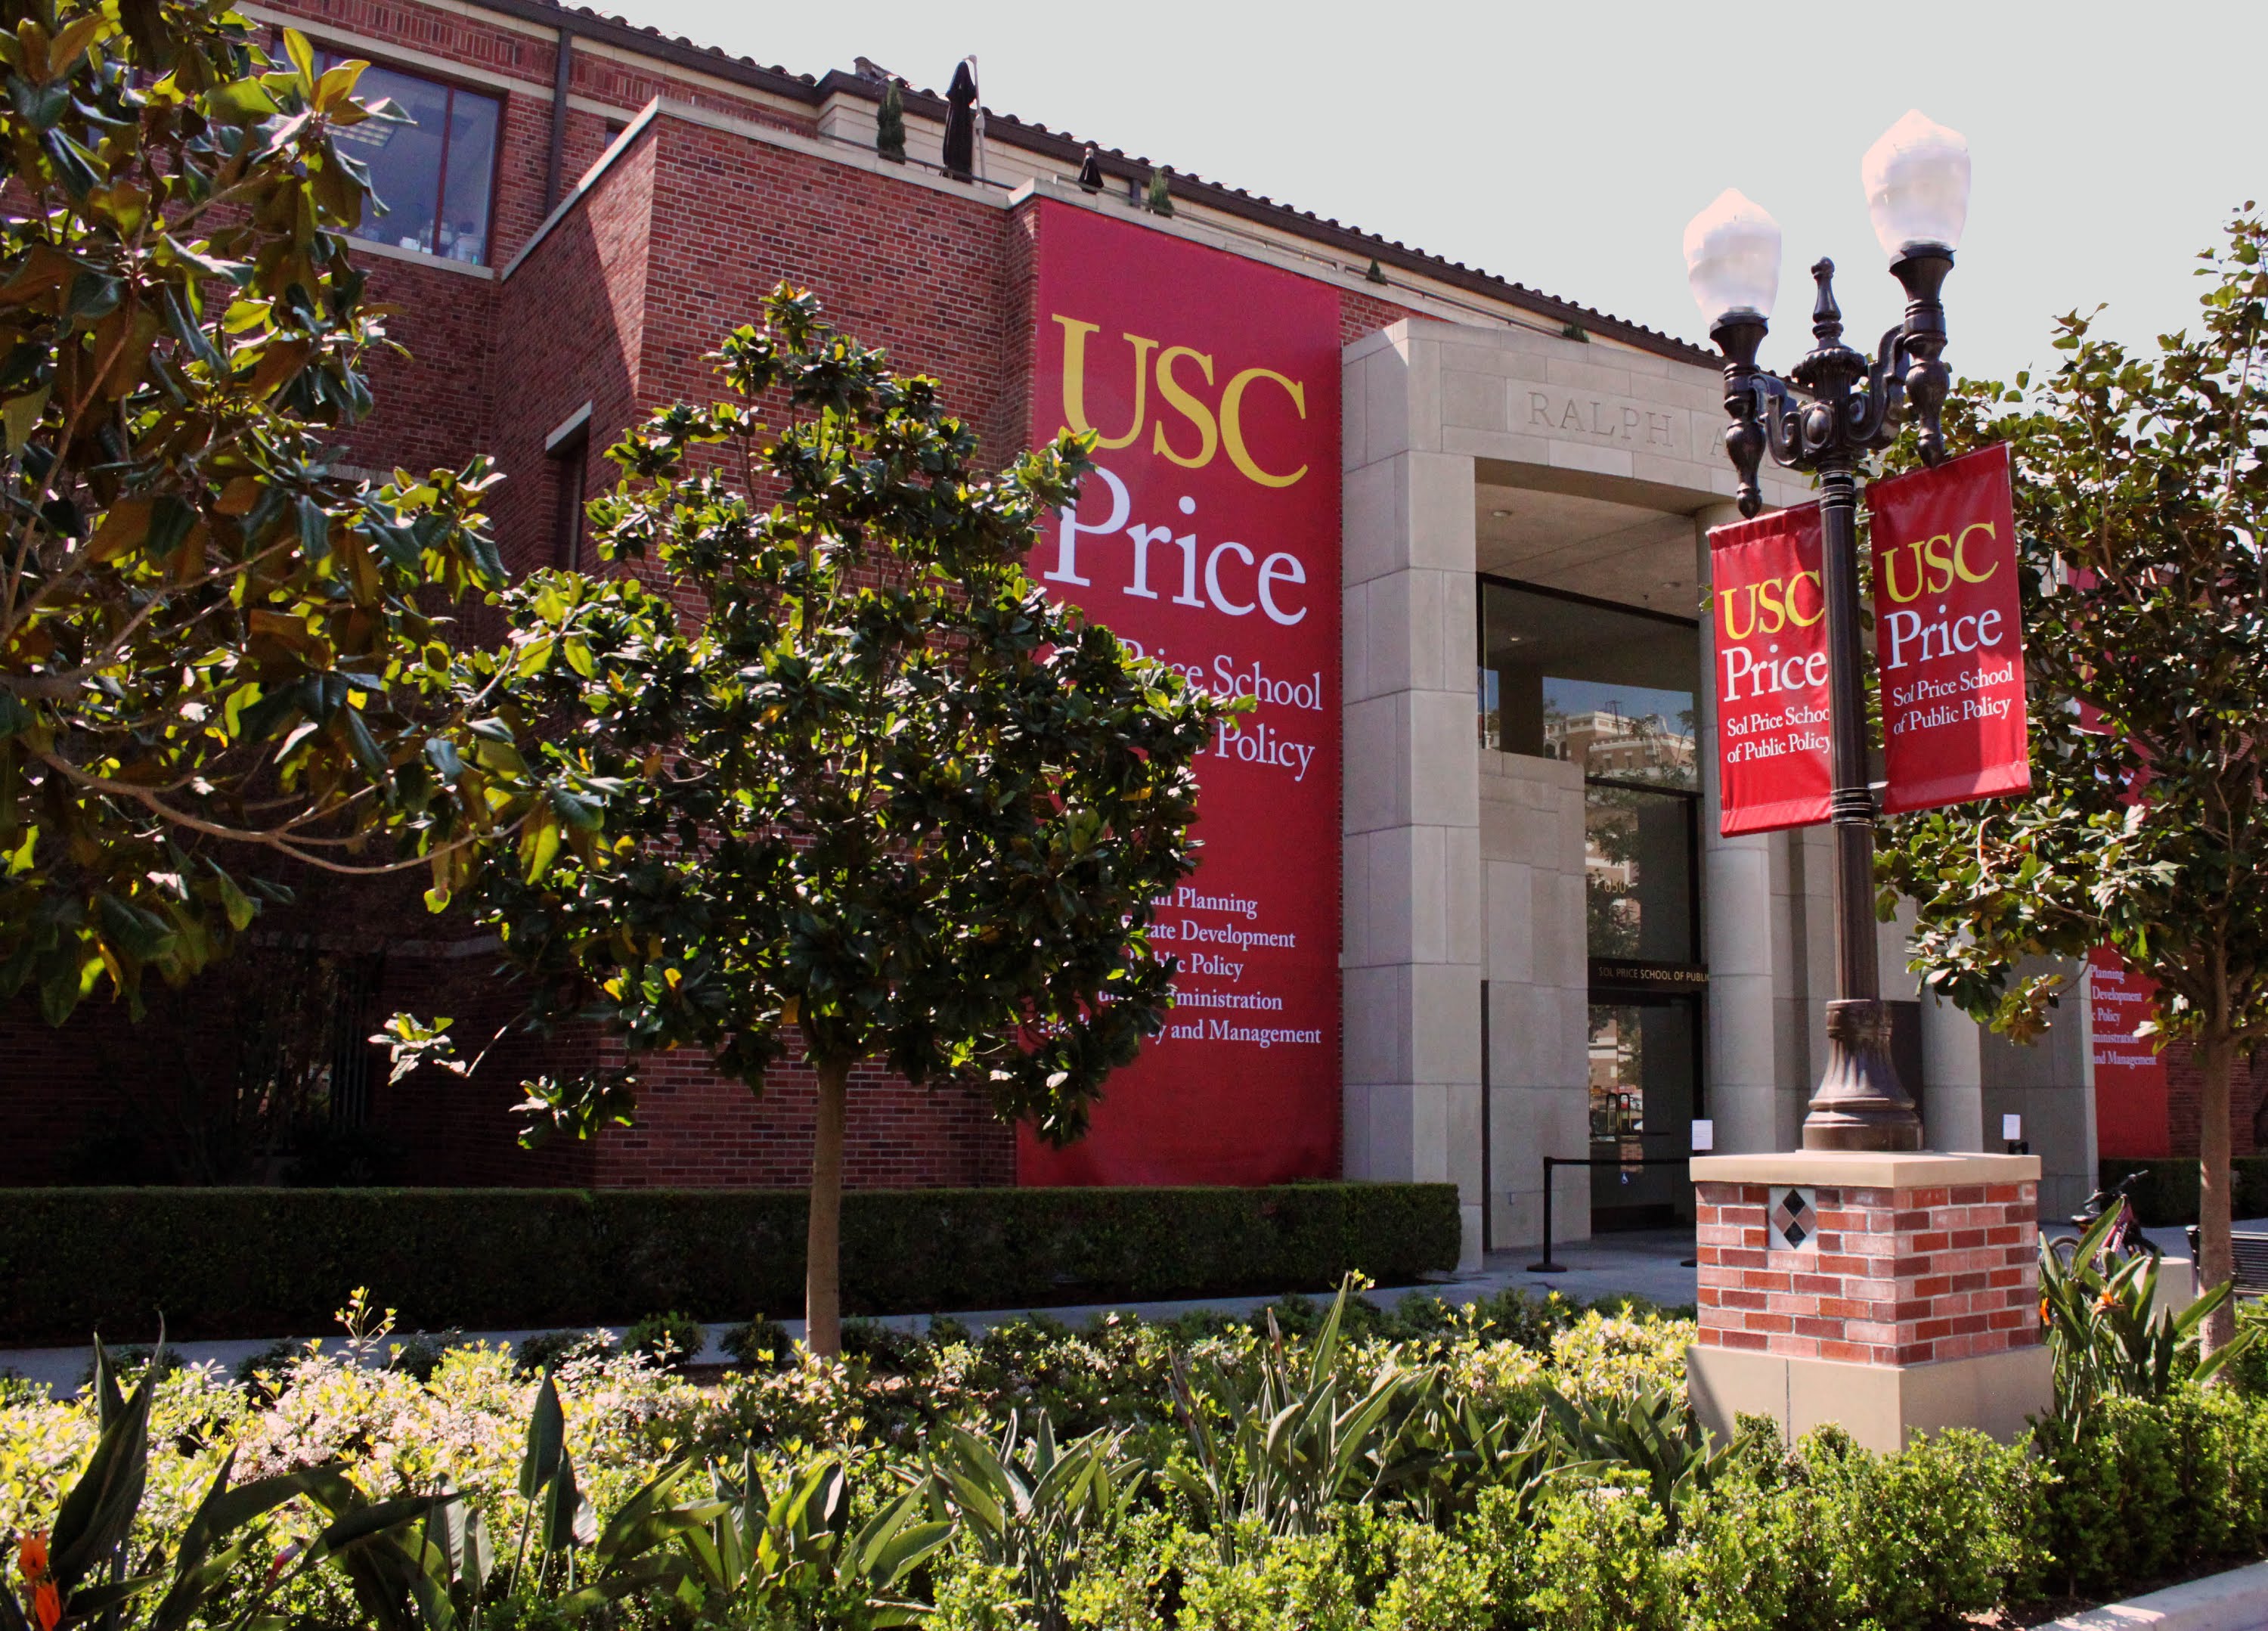 USC Price School of Public Policy